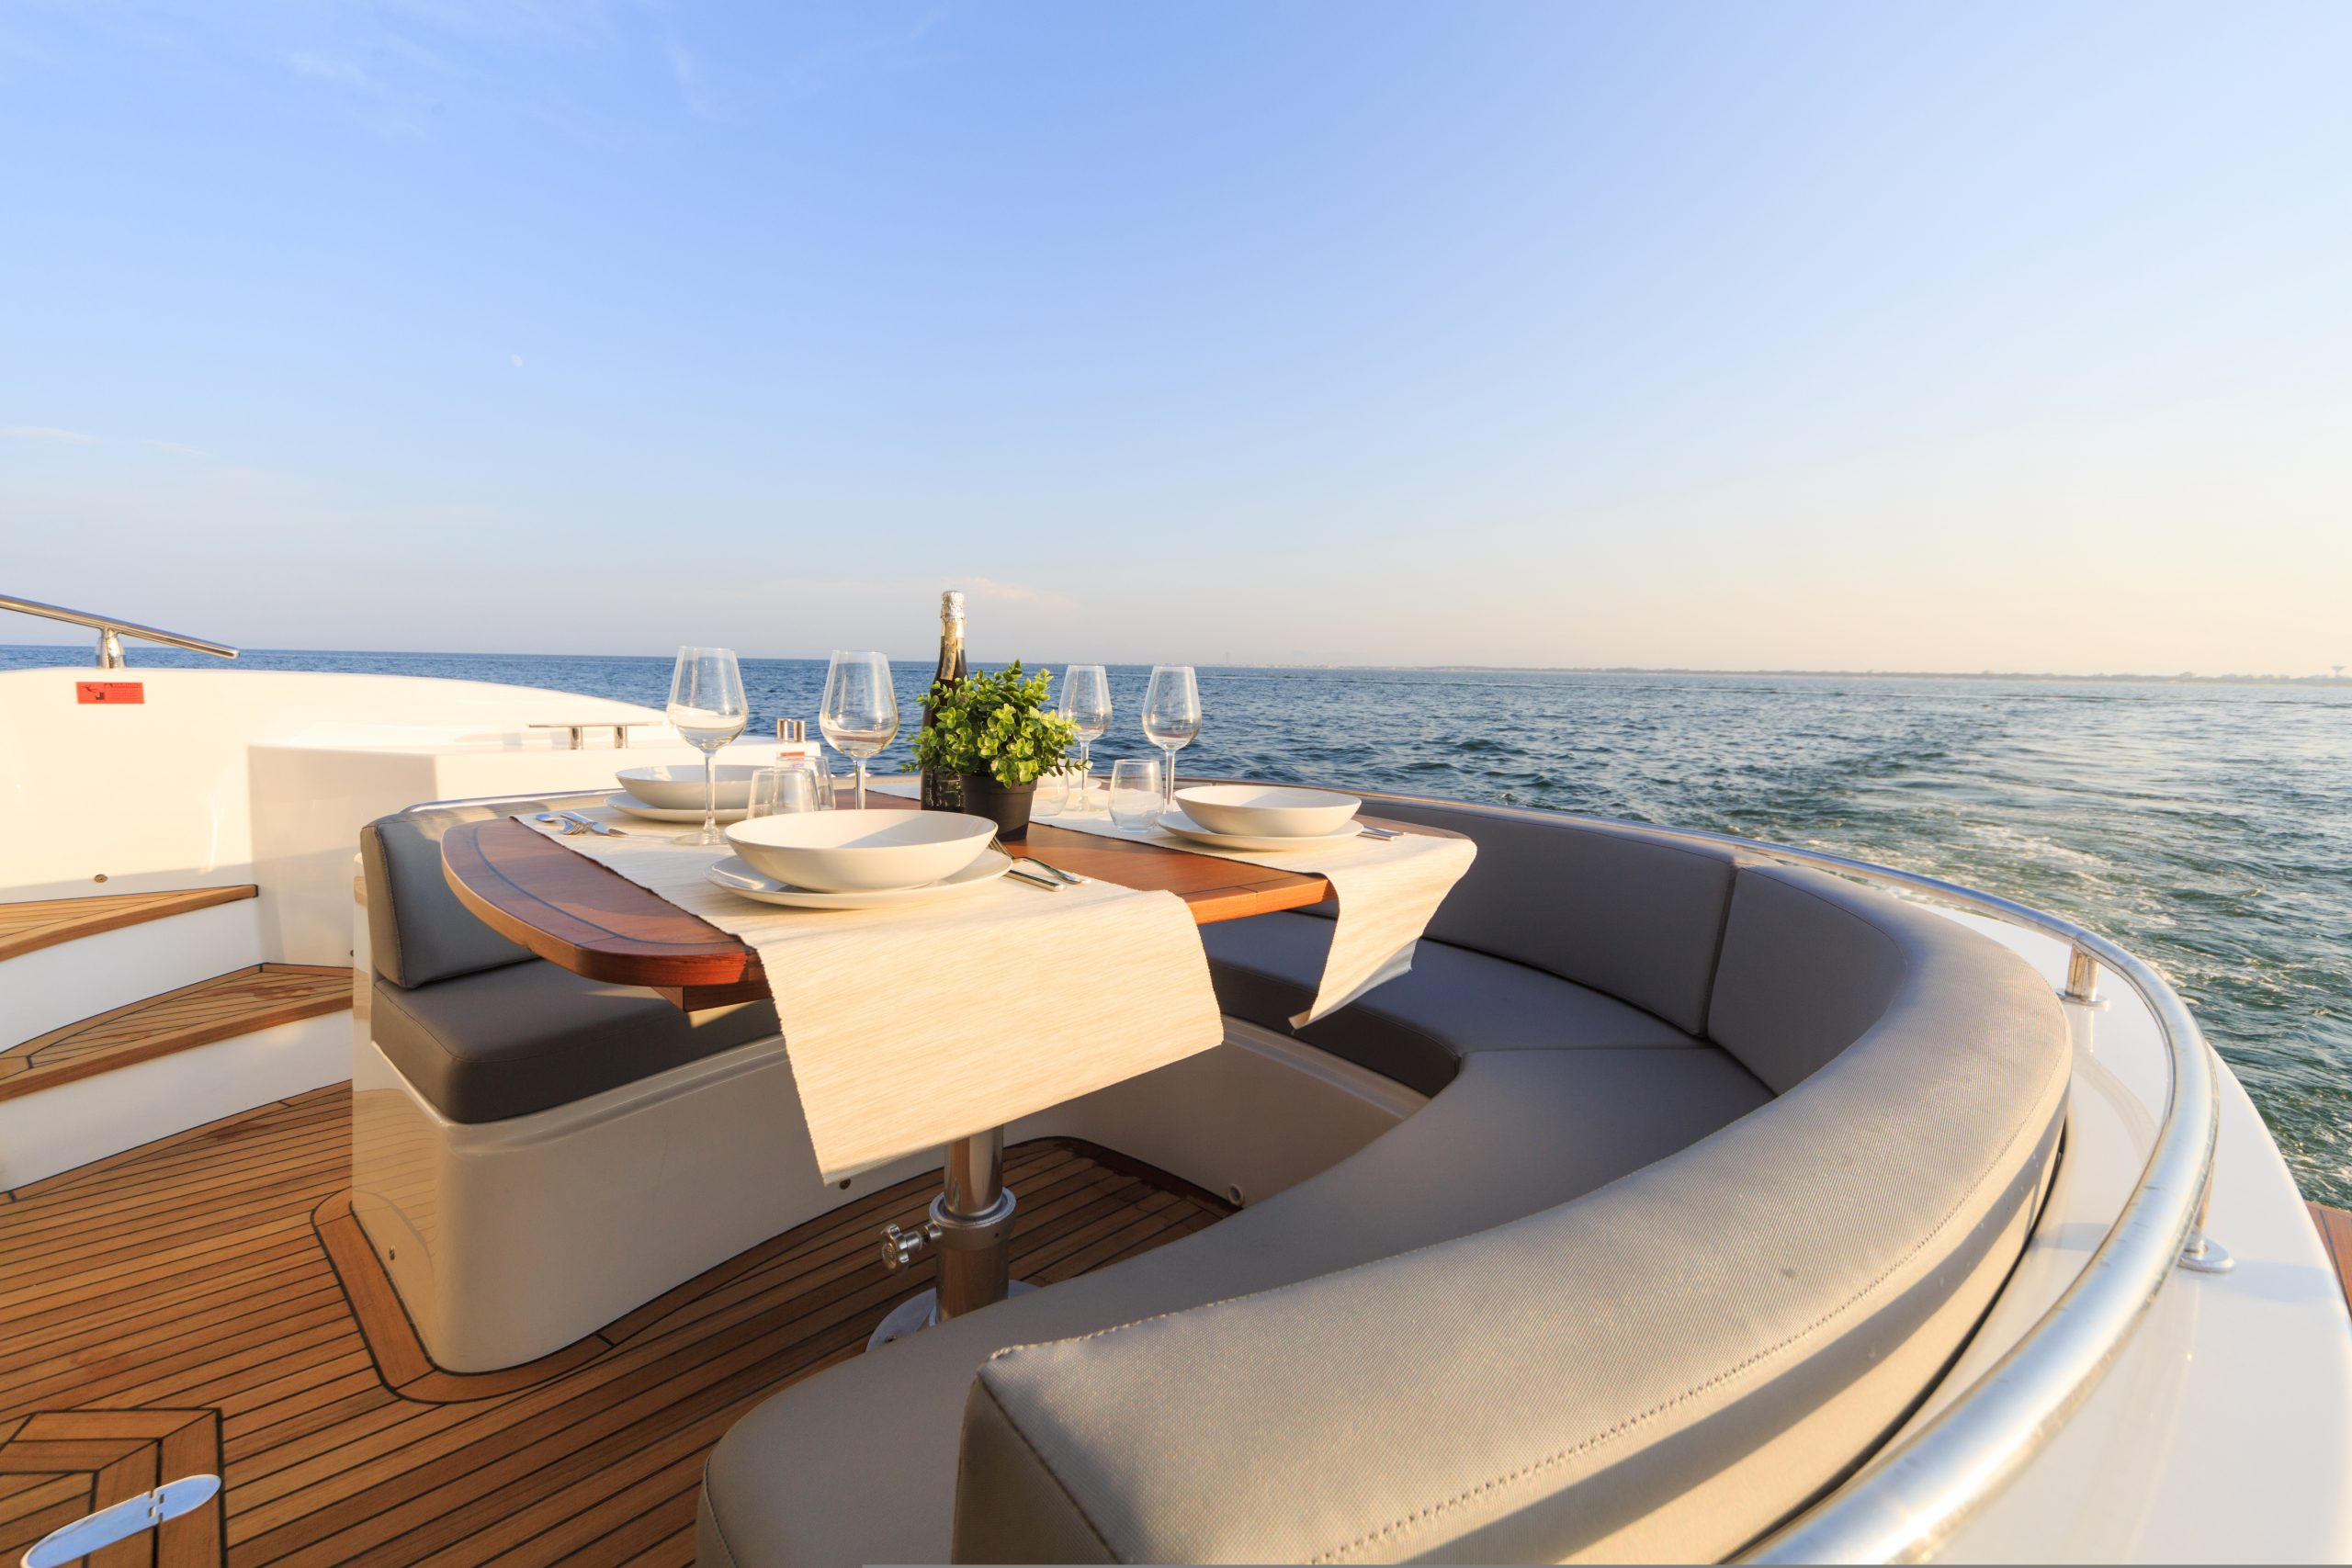 Romantic,Lunch,On,Motor,Yacht,At,Sunset,,Table,Setting,At